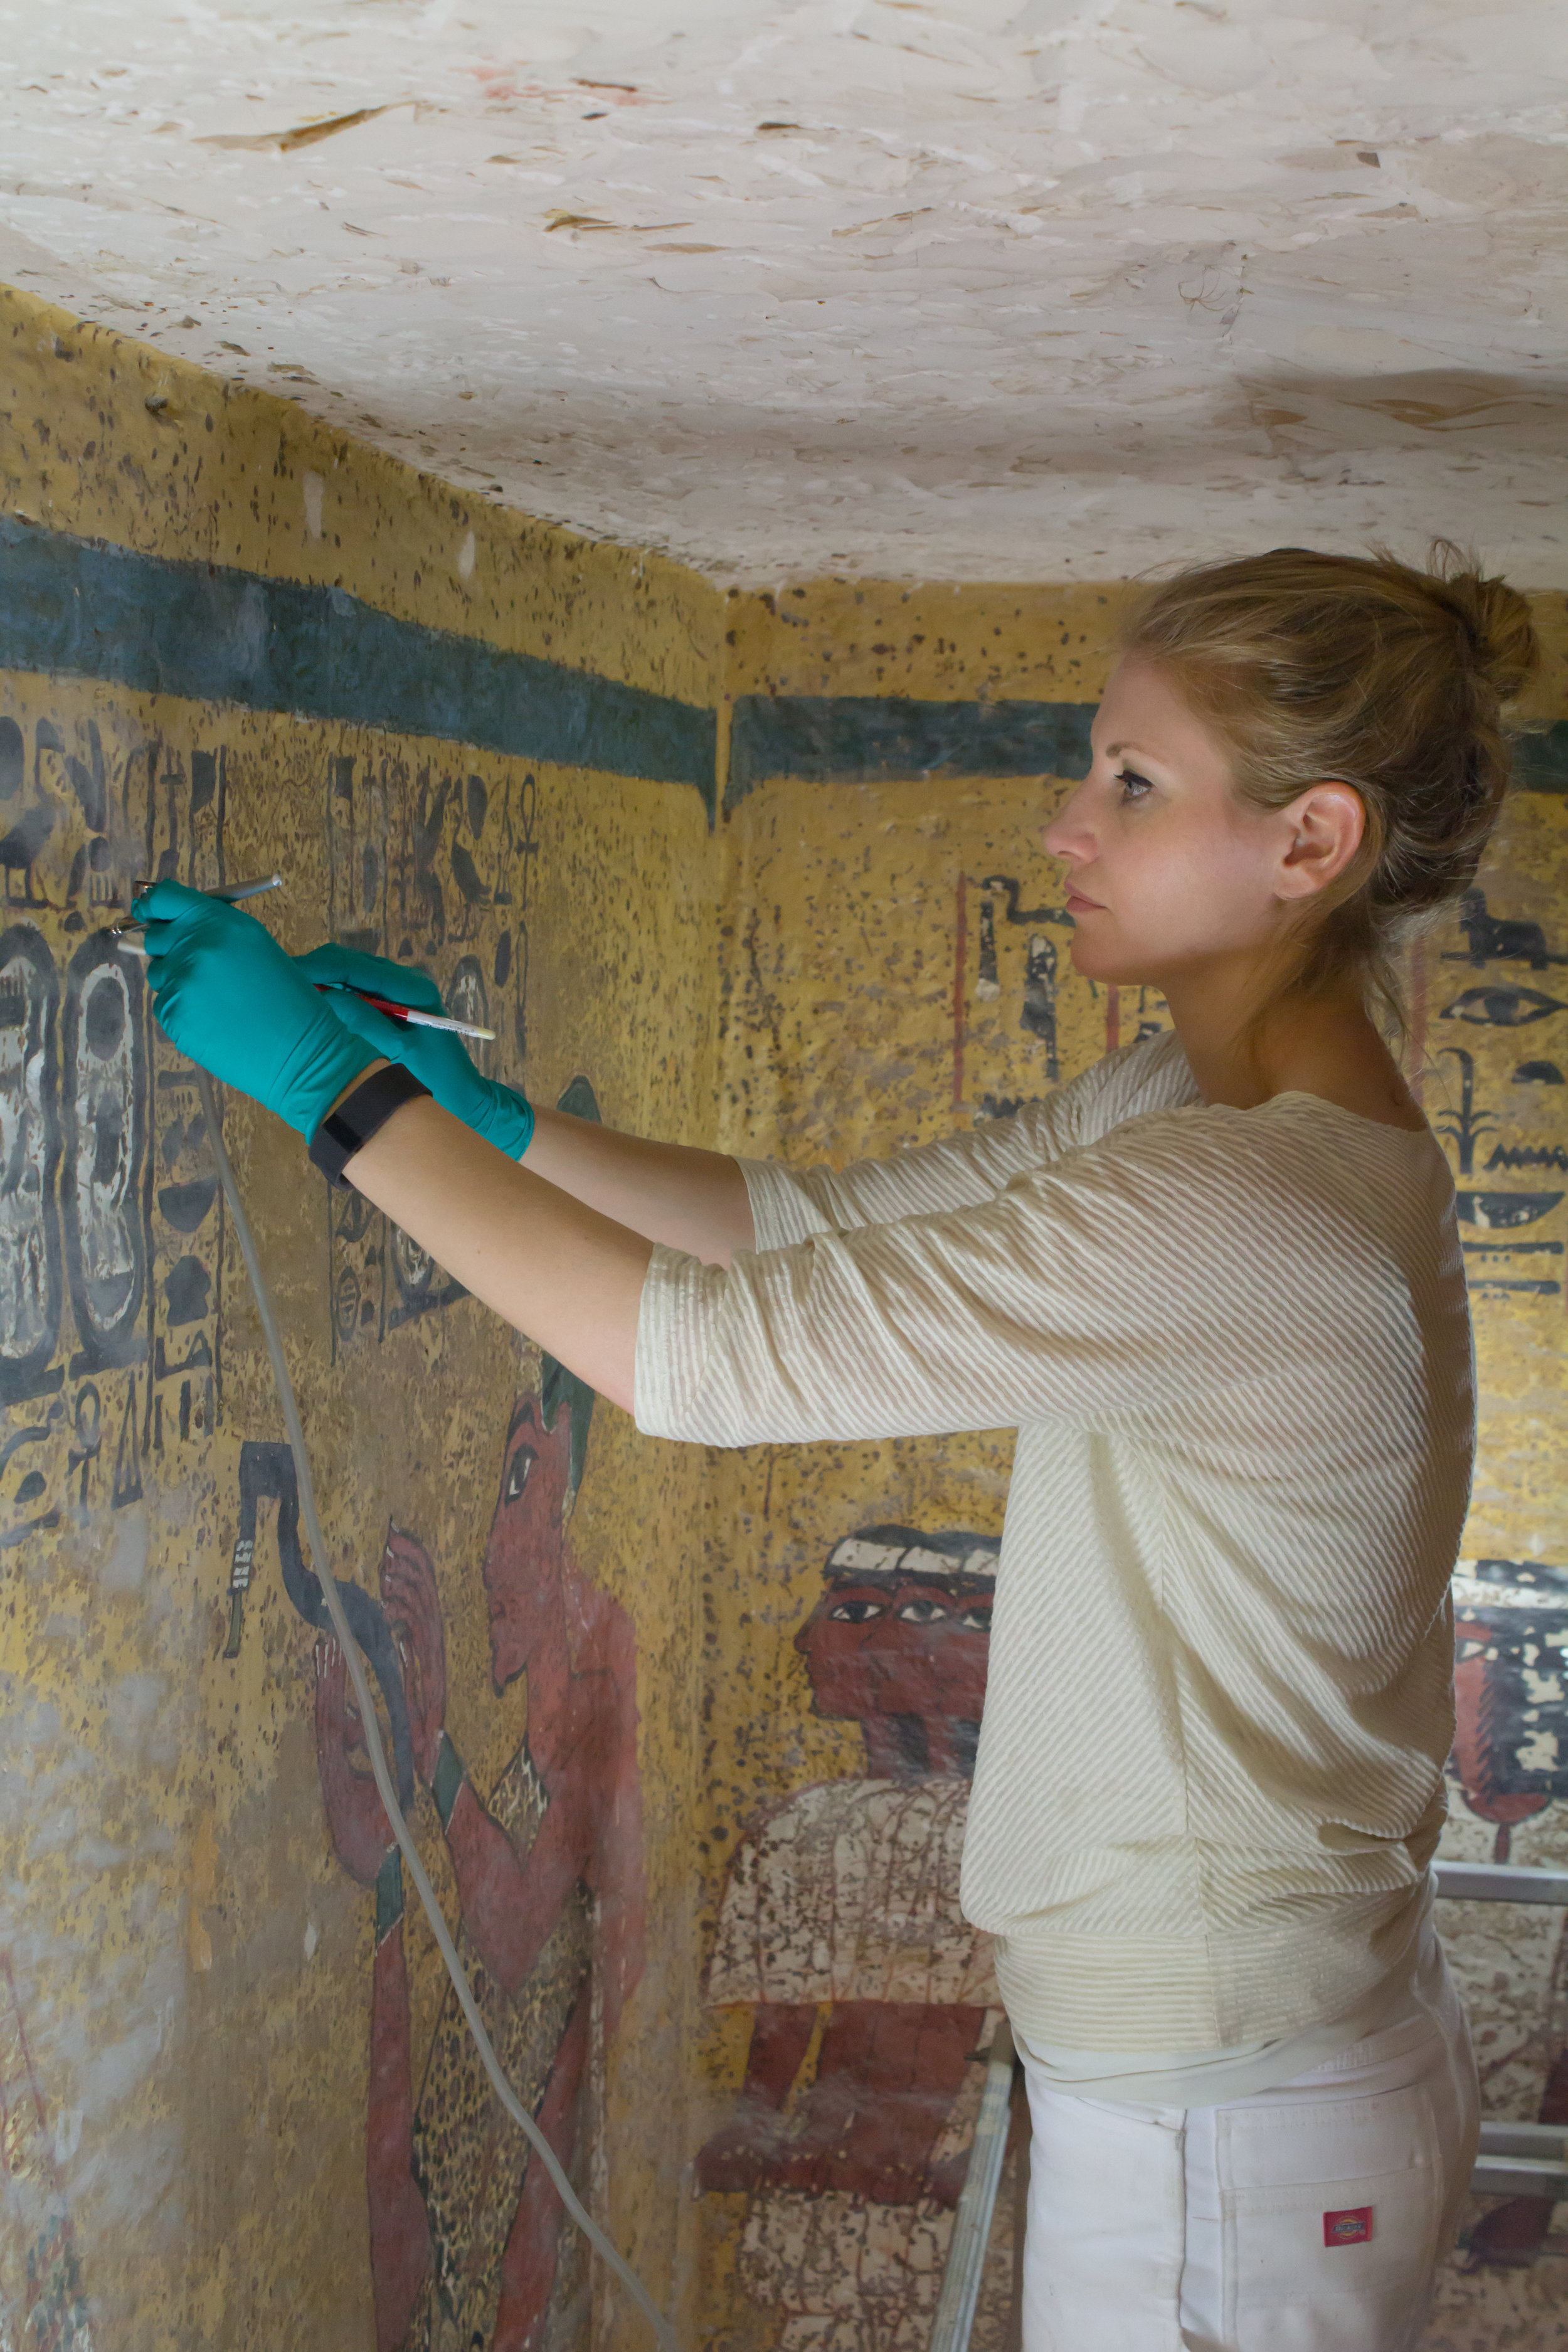  Dust deposition has been a pervasive within the tomb. Fine dust settled on the painted surface in a thick layer, obscuring the imagery. Attempts to dust the paintings outside of the conservation project have led to loss in areas of paint layer insta